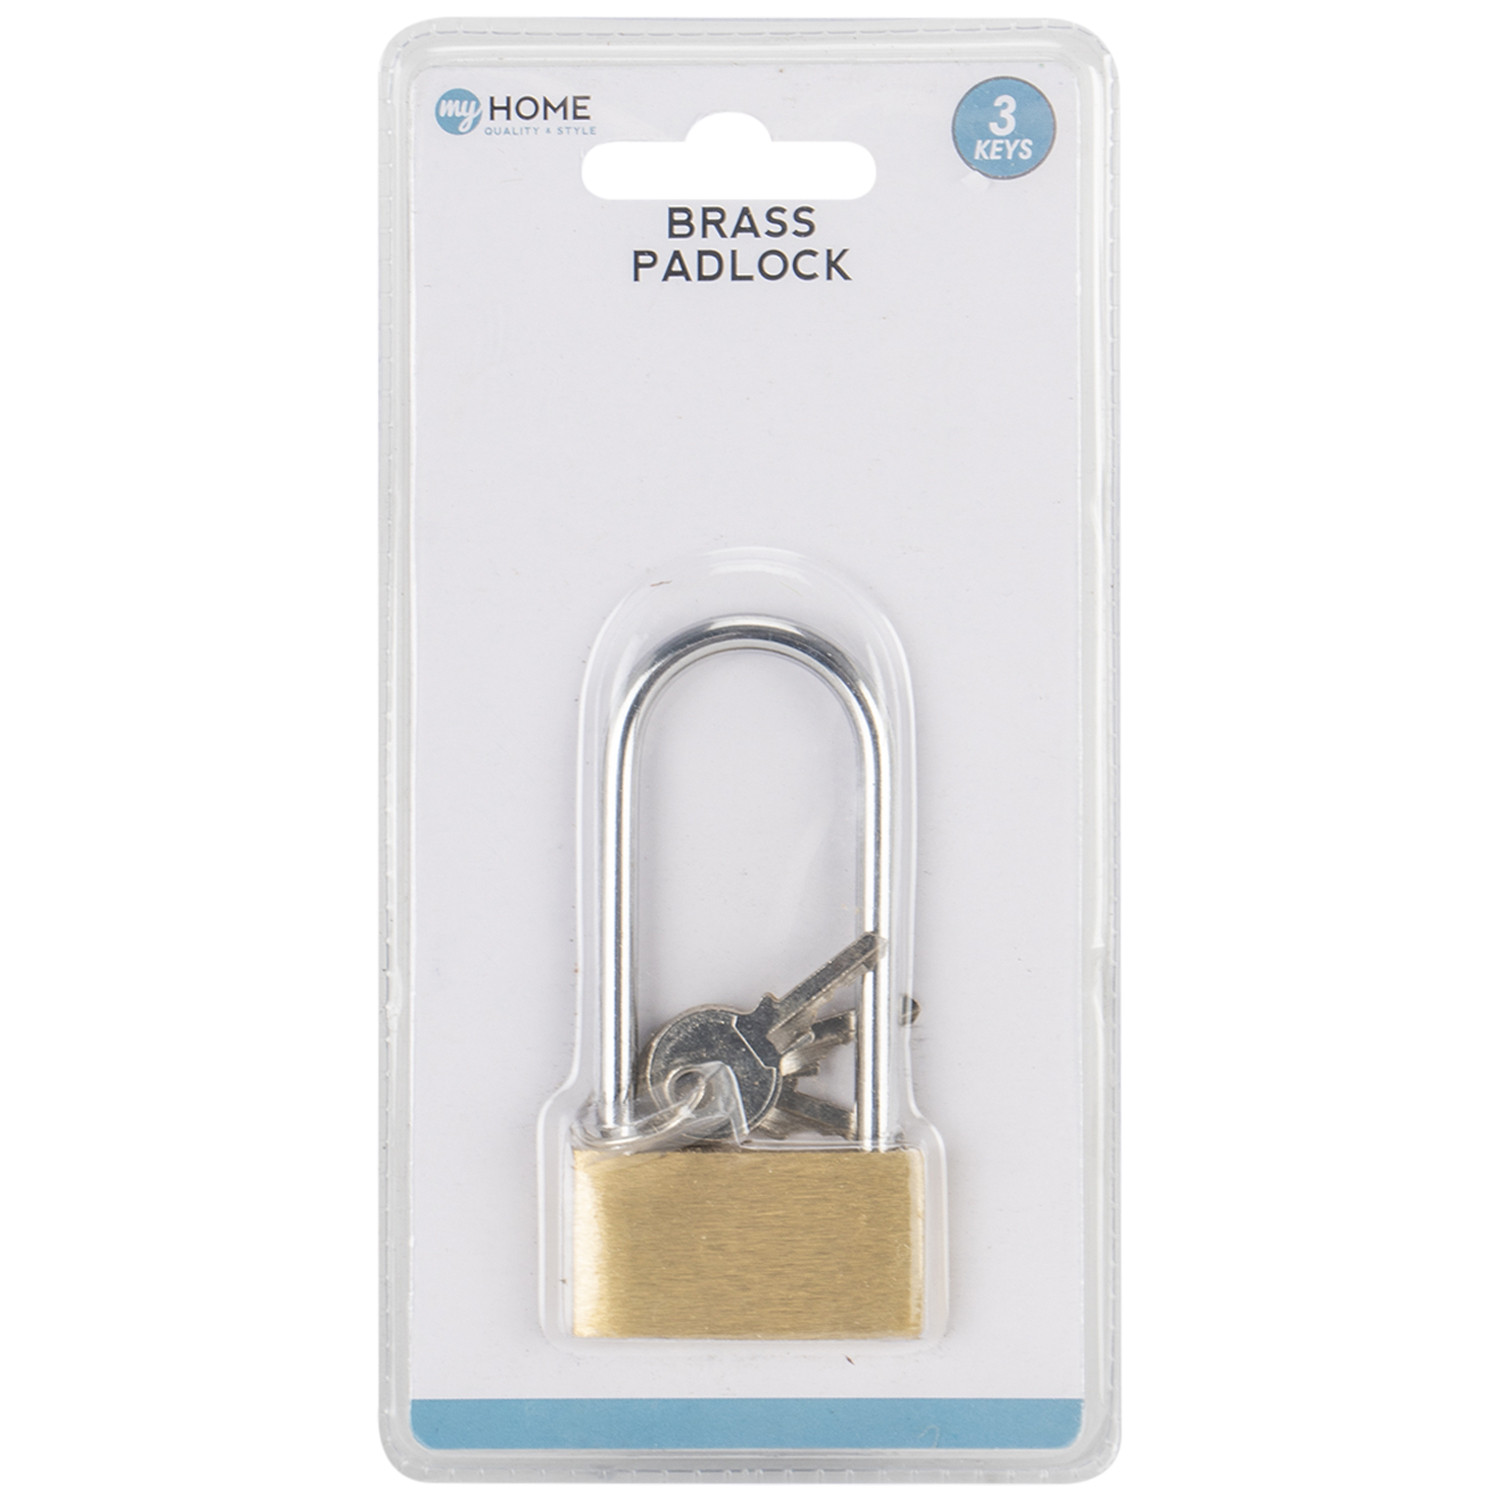 My Home 76mm Long Shackle Brass Padlock with 3 Keys Image